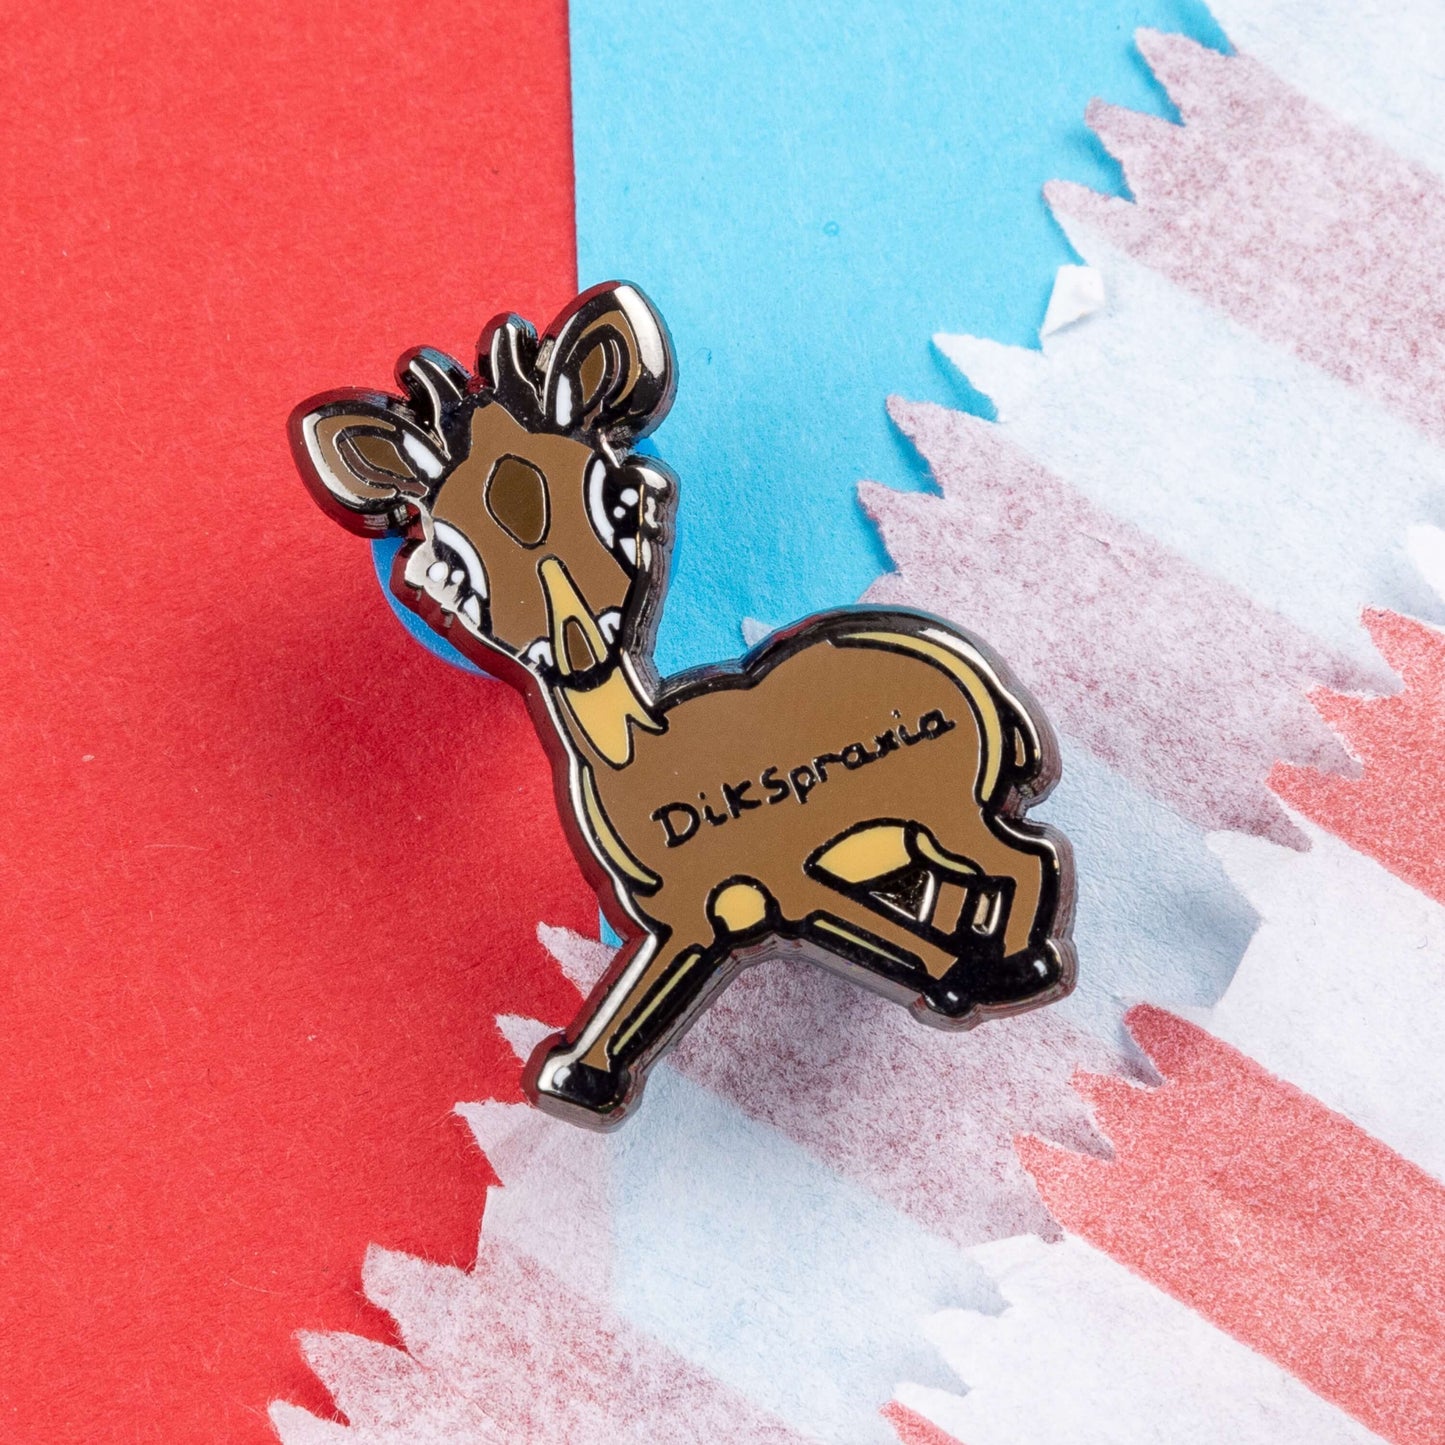 The Dikspraxia Enamel Pin - Dyspraxia on red and blue card. The brown dik dik antelope shaped enamel pin has its two front legs splayed chaotically with black text reading 'dikspraxia' across its middle. The design is raising awareness for dyspraxia and neurodivergence.